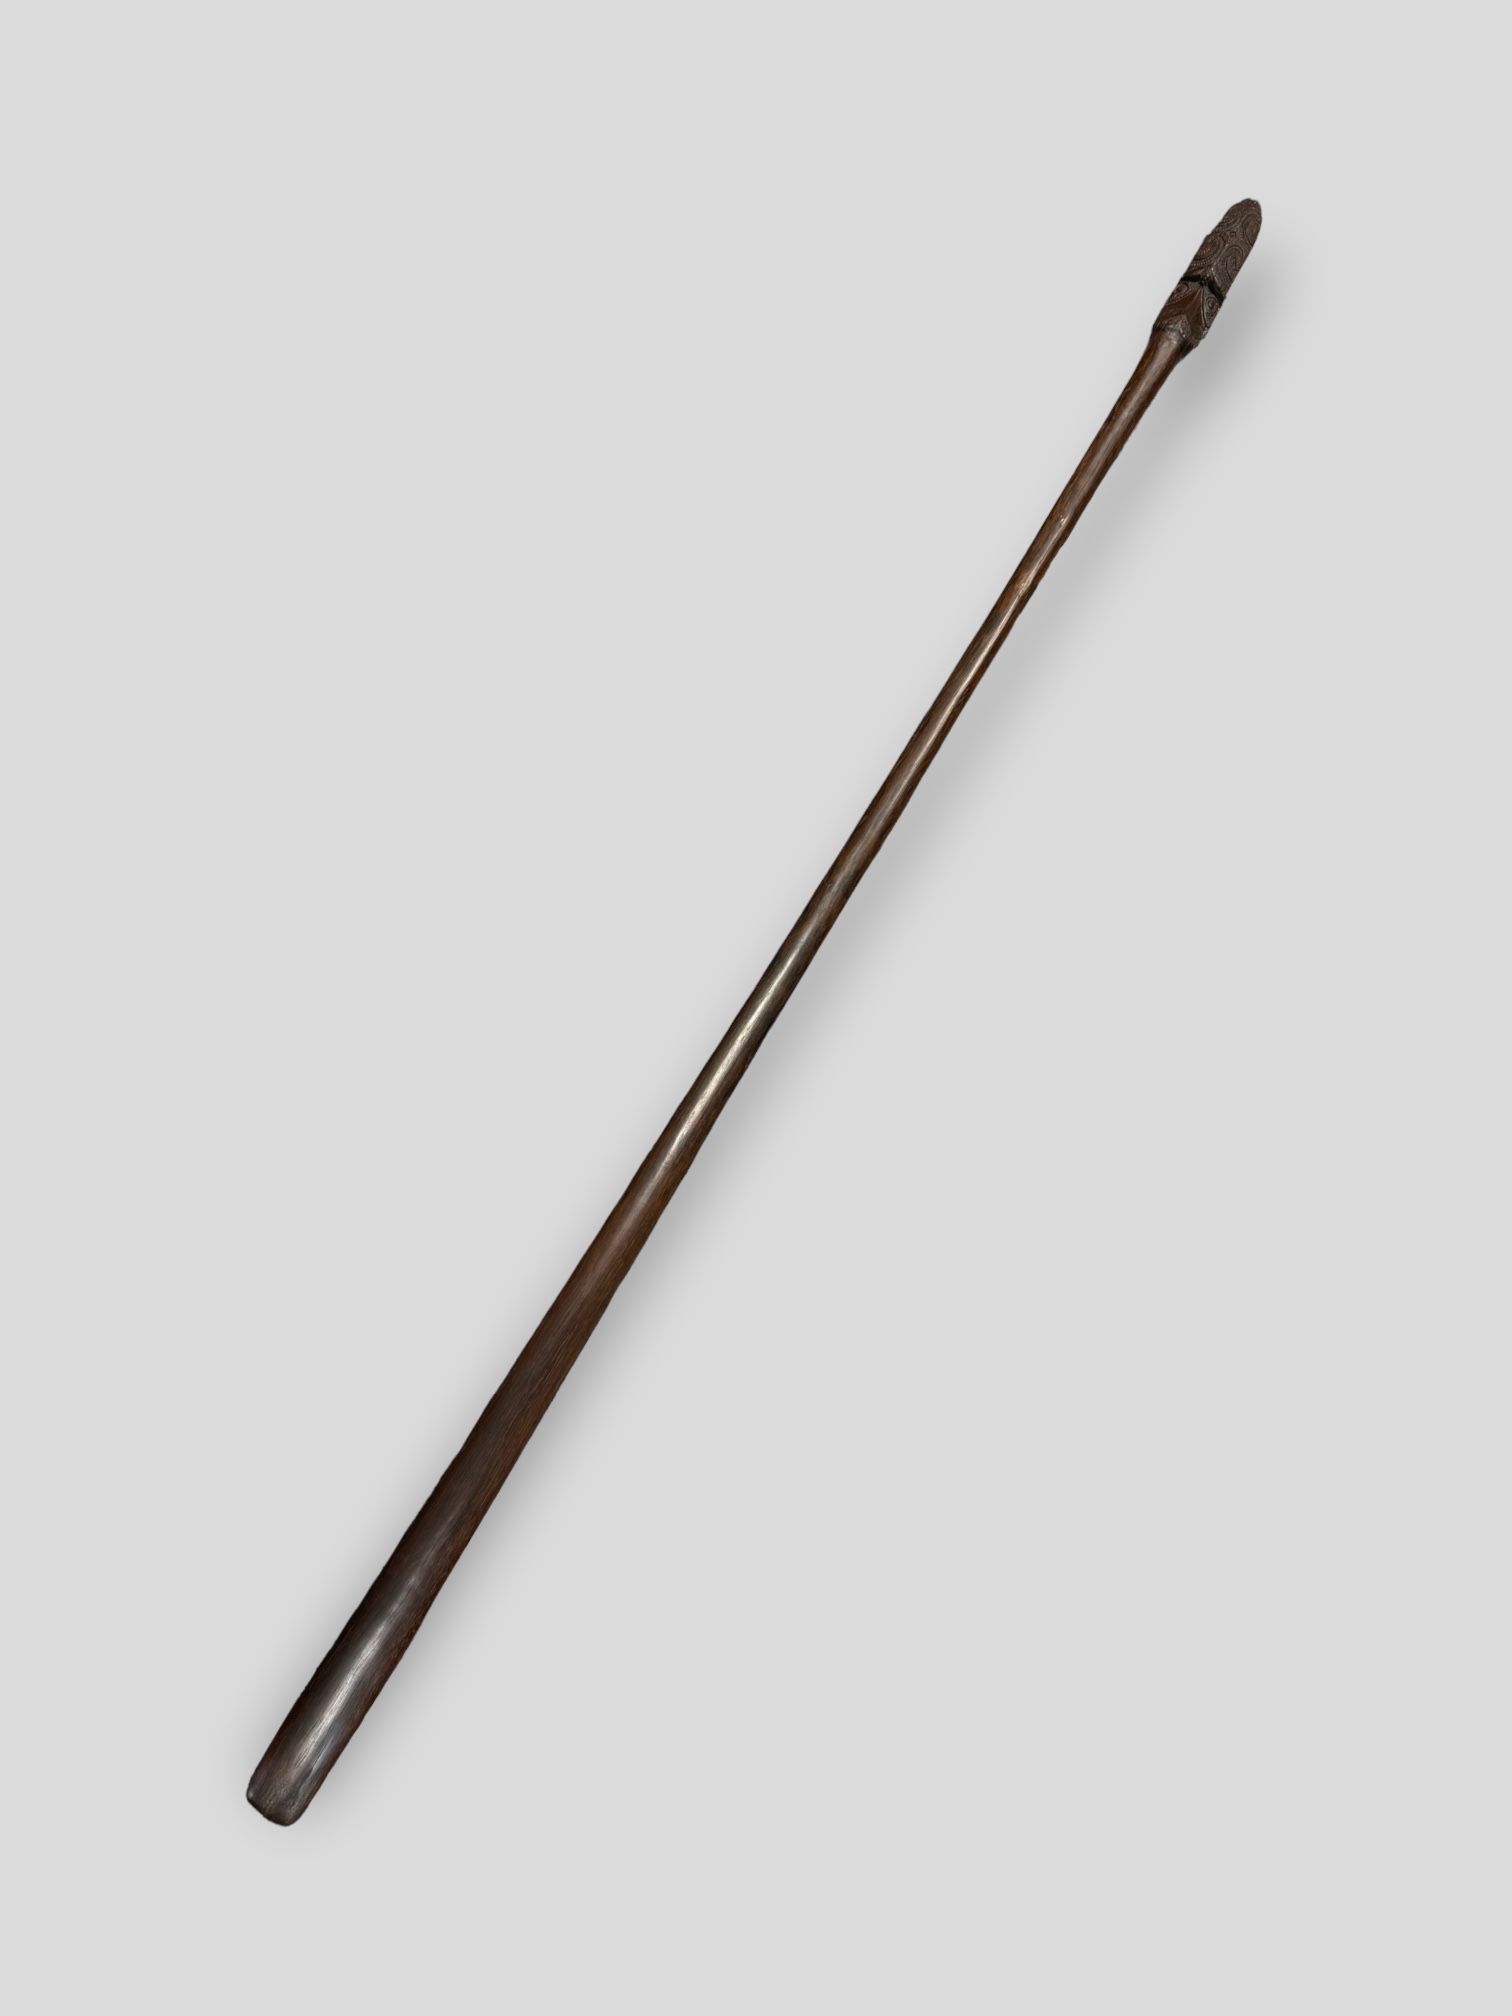 A Maori Taiaha Staff. New Zealand, ca 19th century.Typically carved with two pairs of eyes and